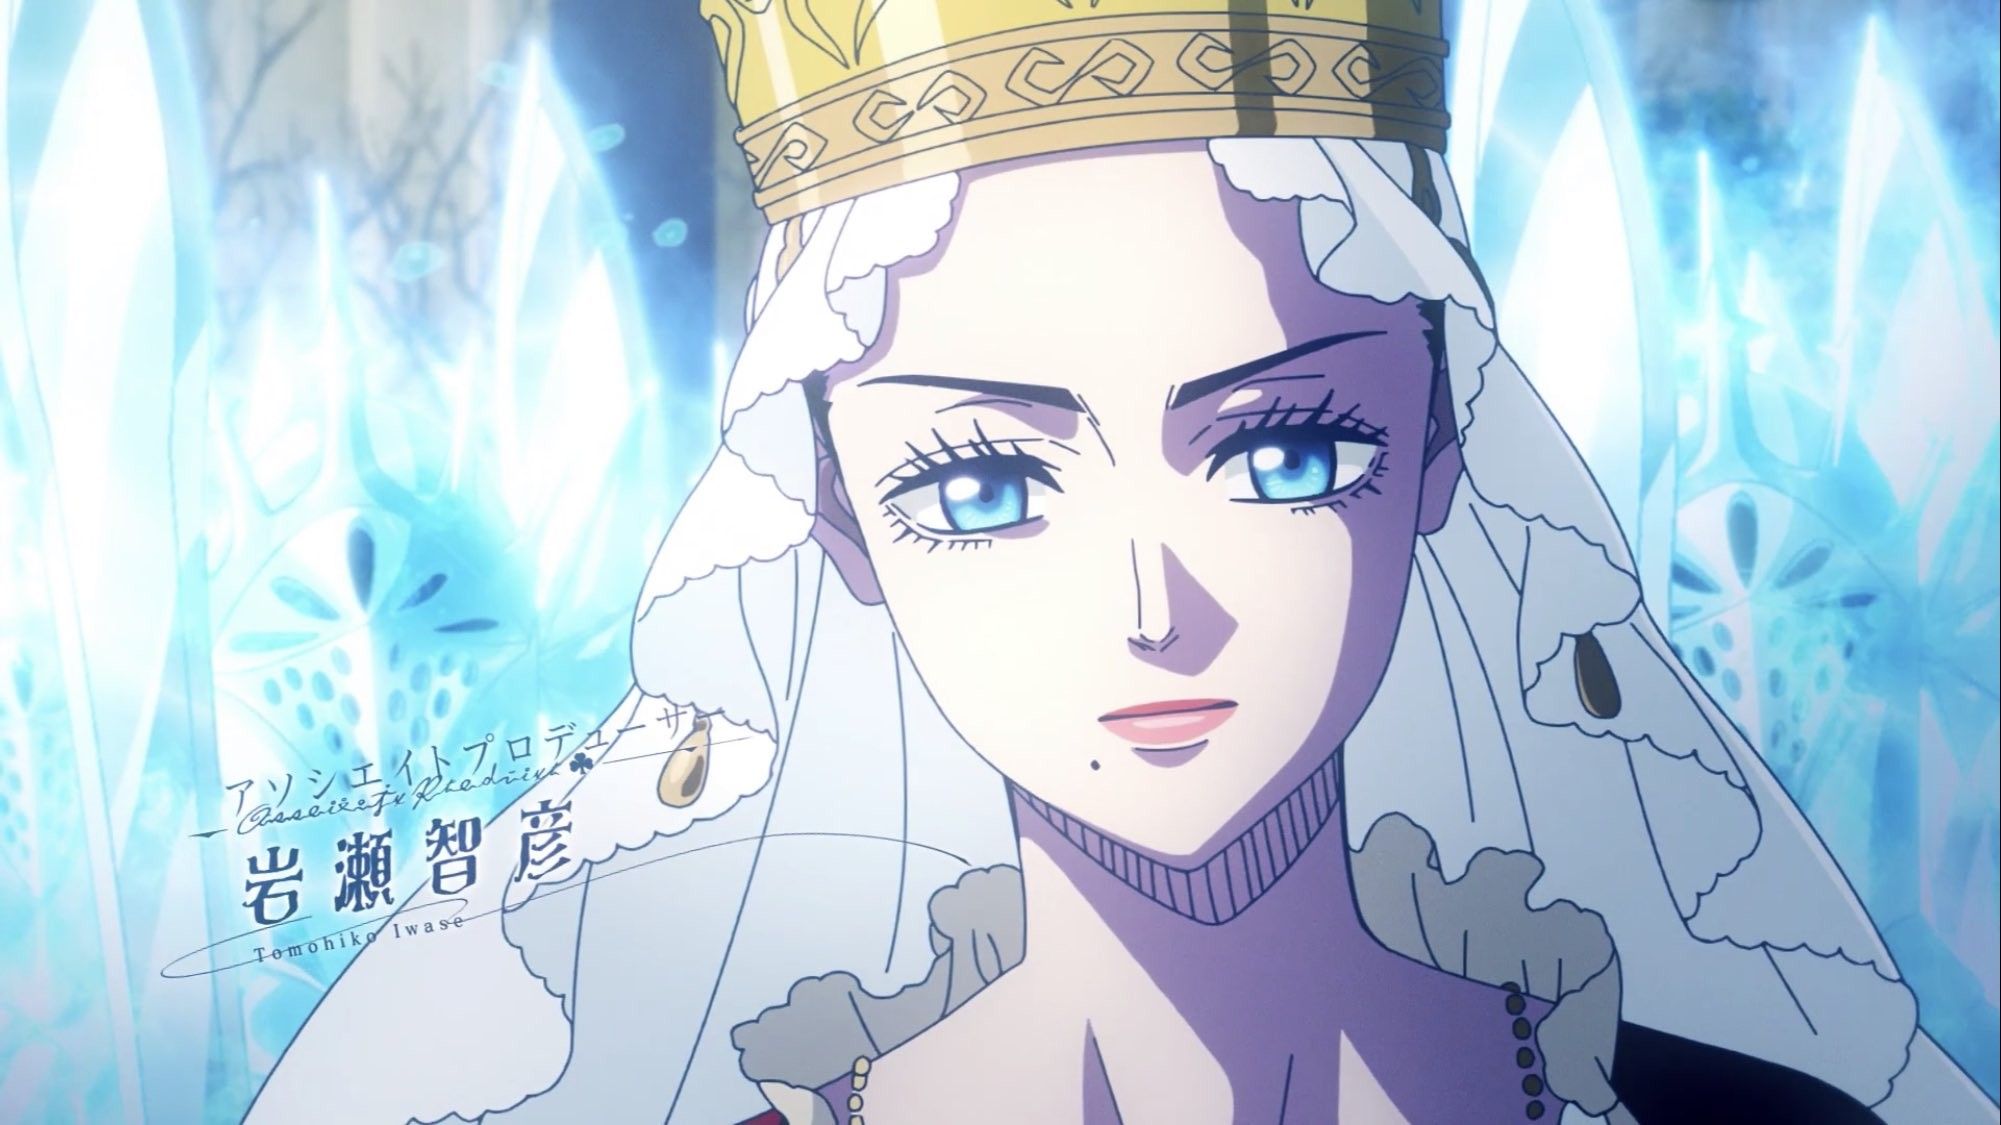 Black Clover: Ranking the Strongest Characters